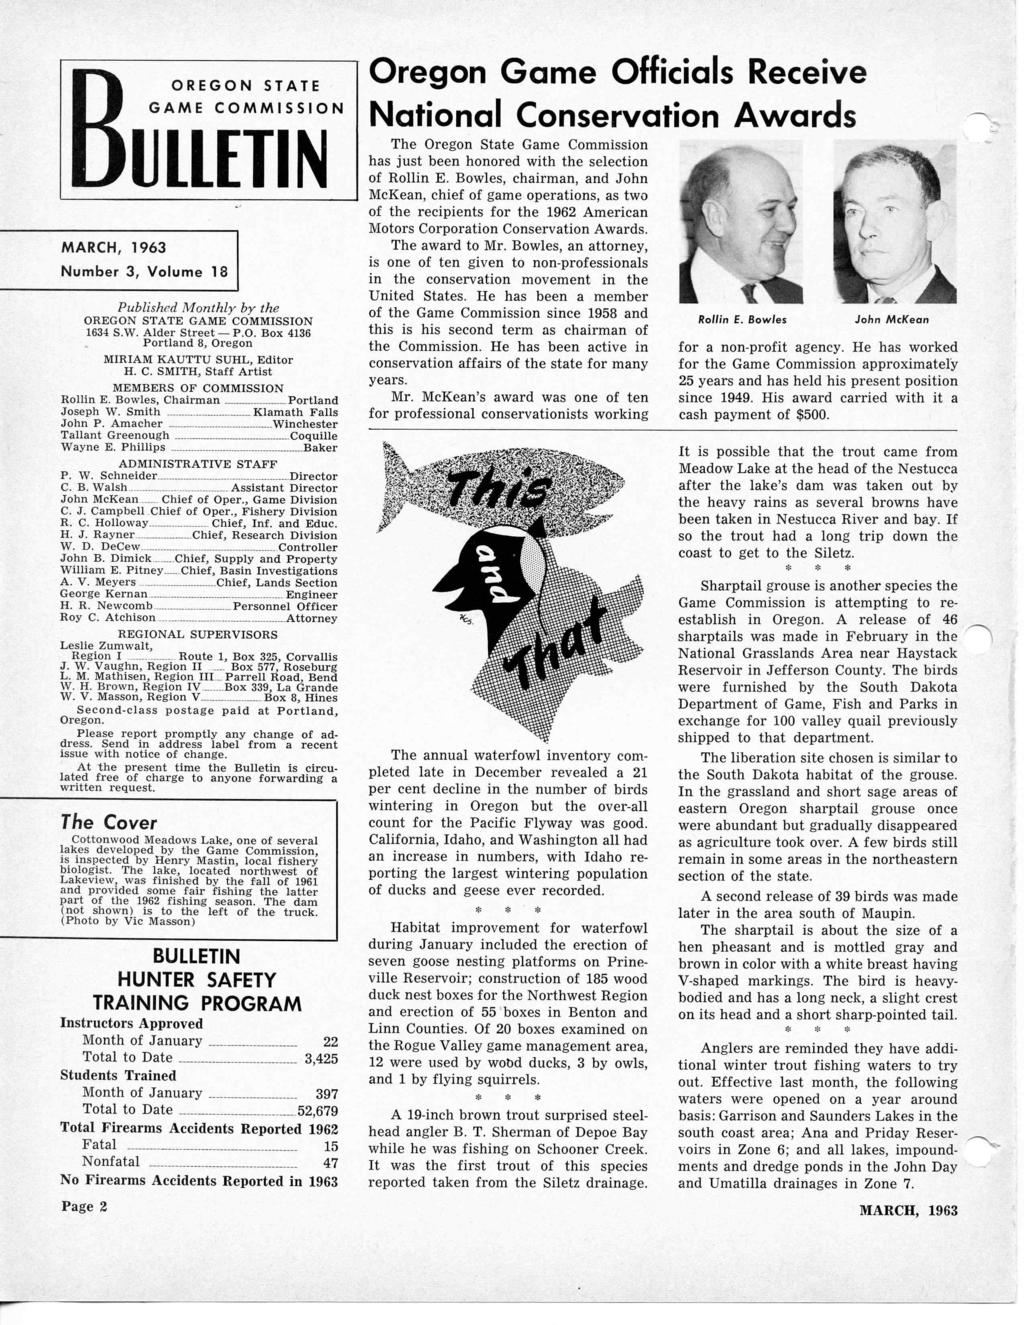 BOREGON STATE GAME COMMISSION ULLETIN MARCH, 1963 Number 3, Volume 18 Published Monthly by the OREGON STATE GAME COMMISSION 1634 S.W. Alder Street P.O. Box 4136 Portland 8, Oregon MIRIAM KAUTTU SUHL, Editor H.